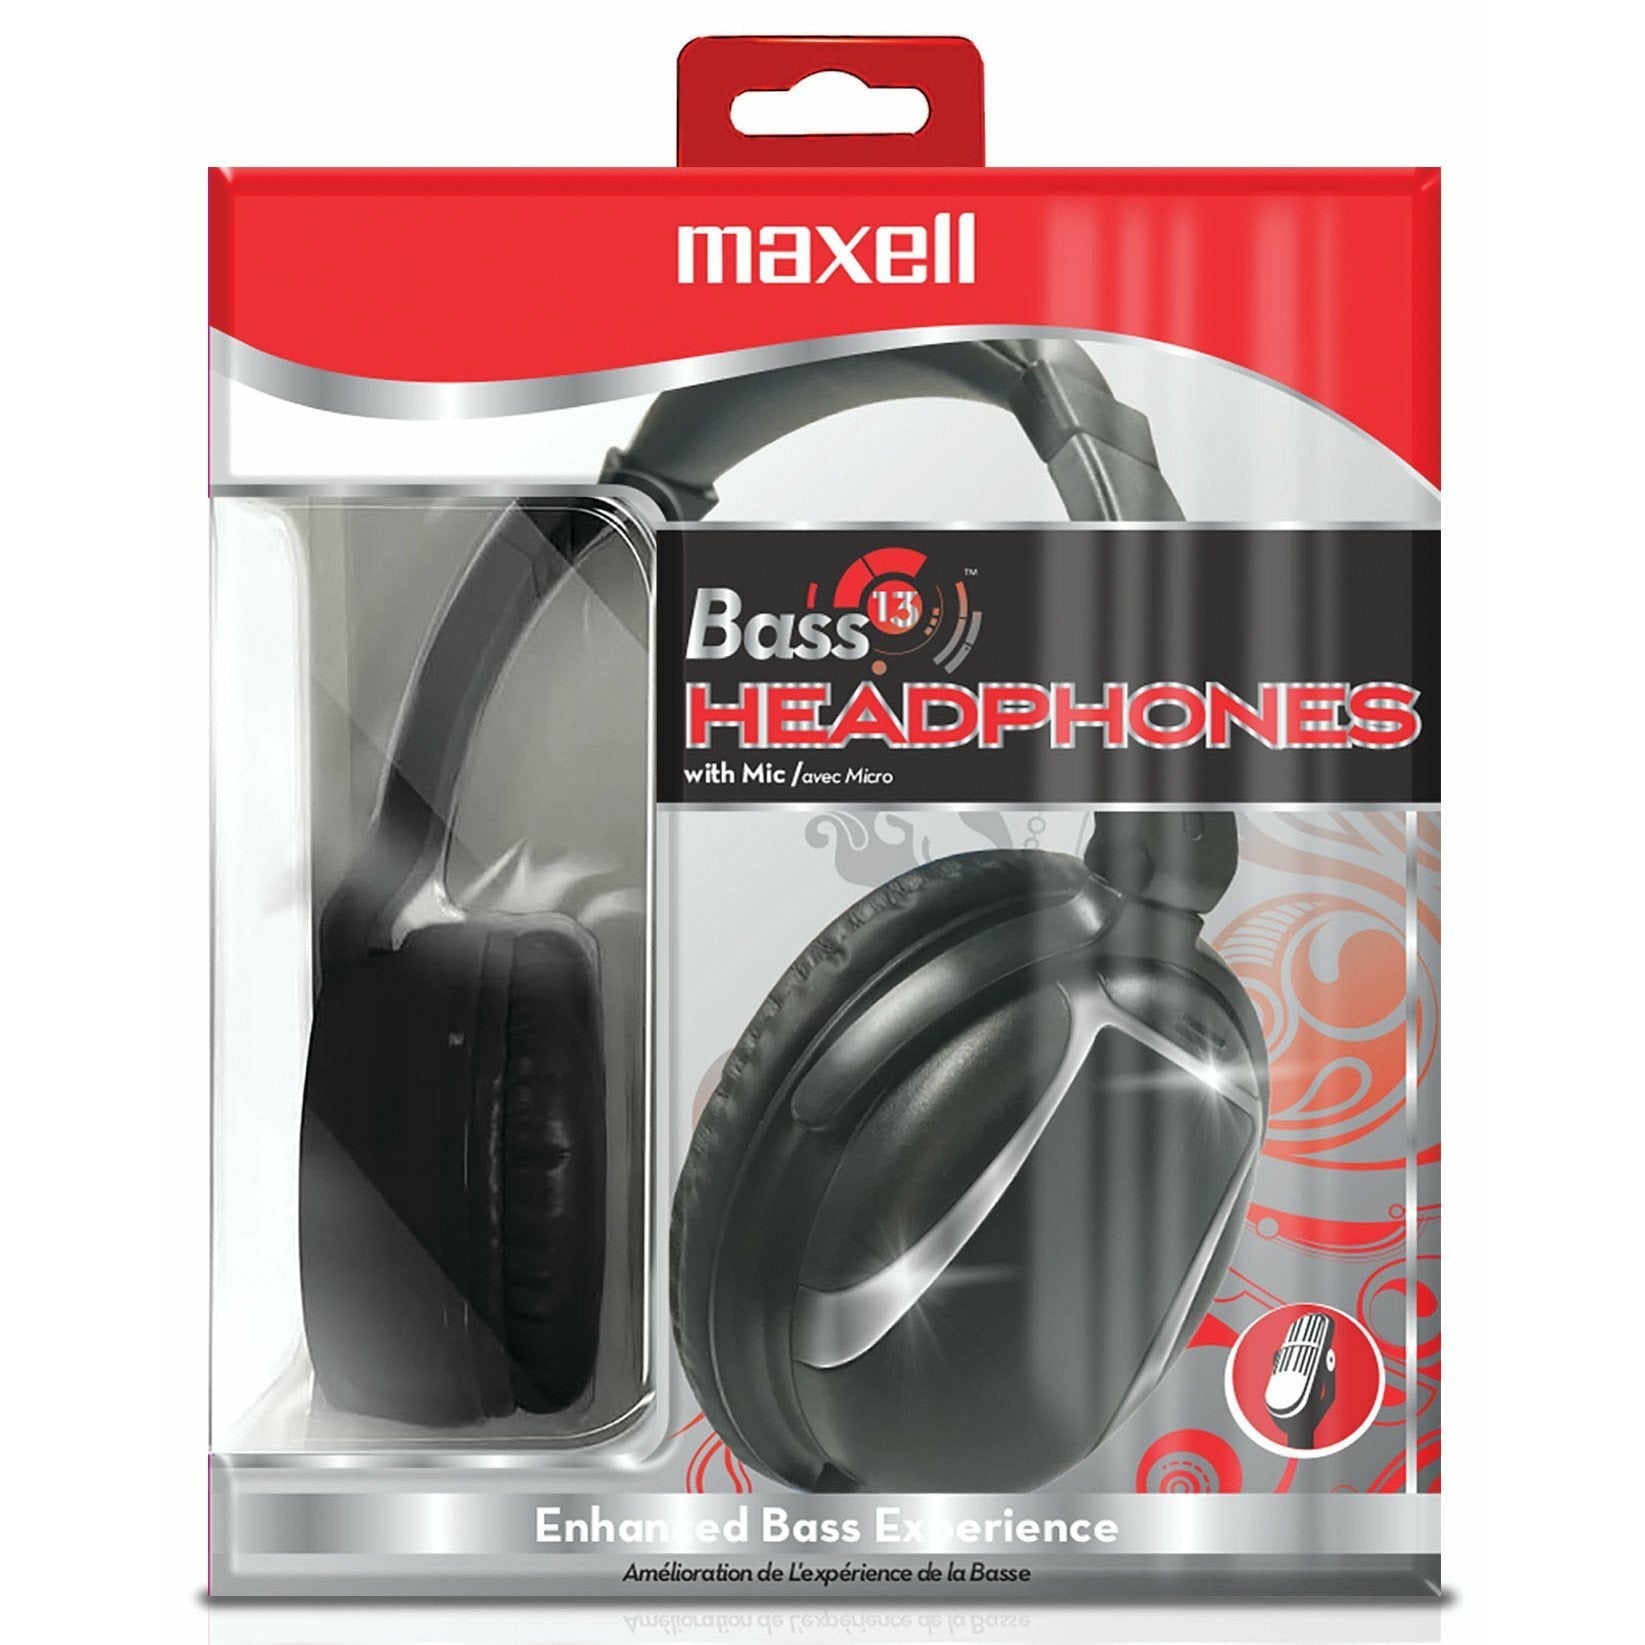 Maxell Bass13™ Headphones with Mic